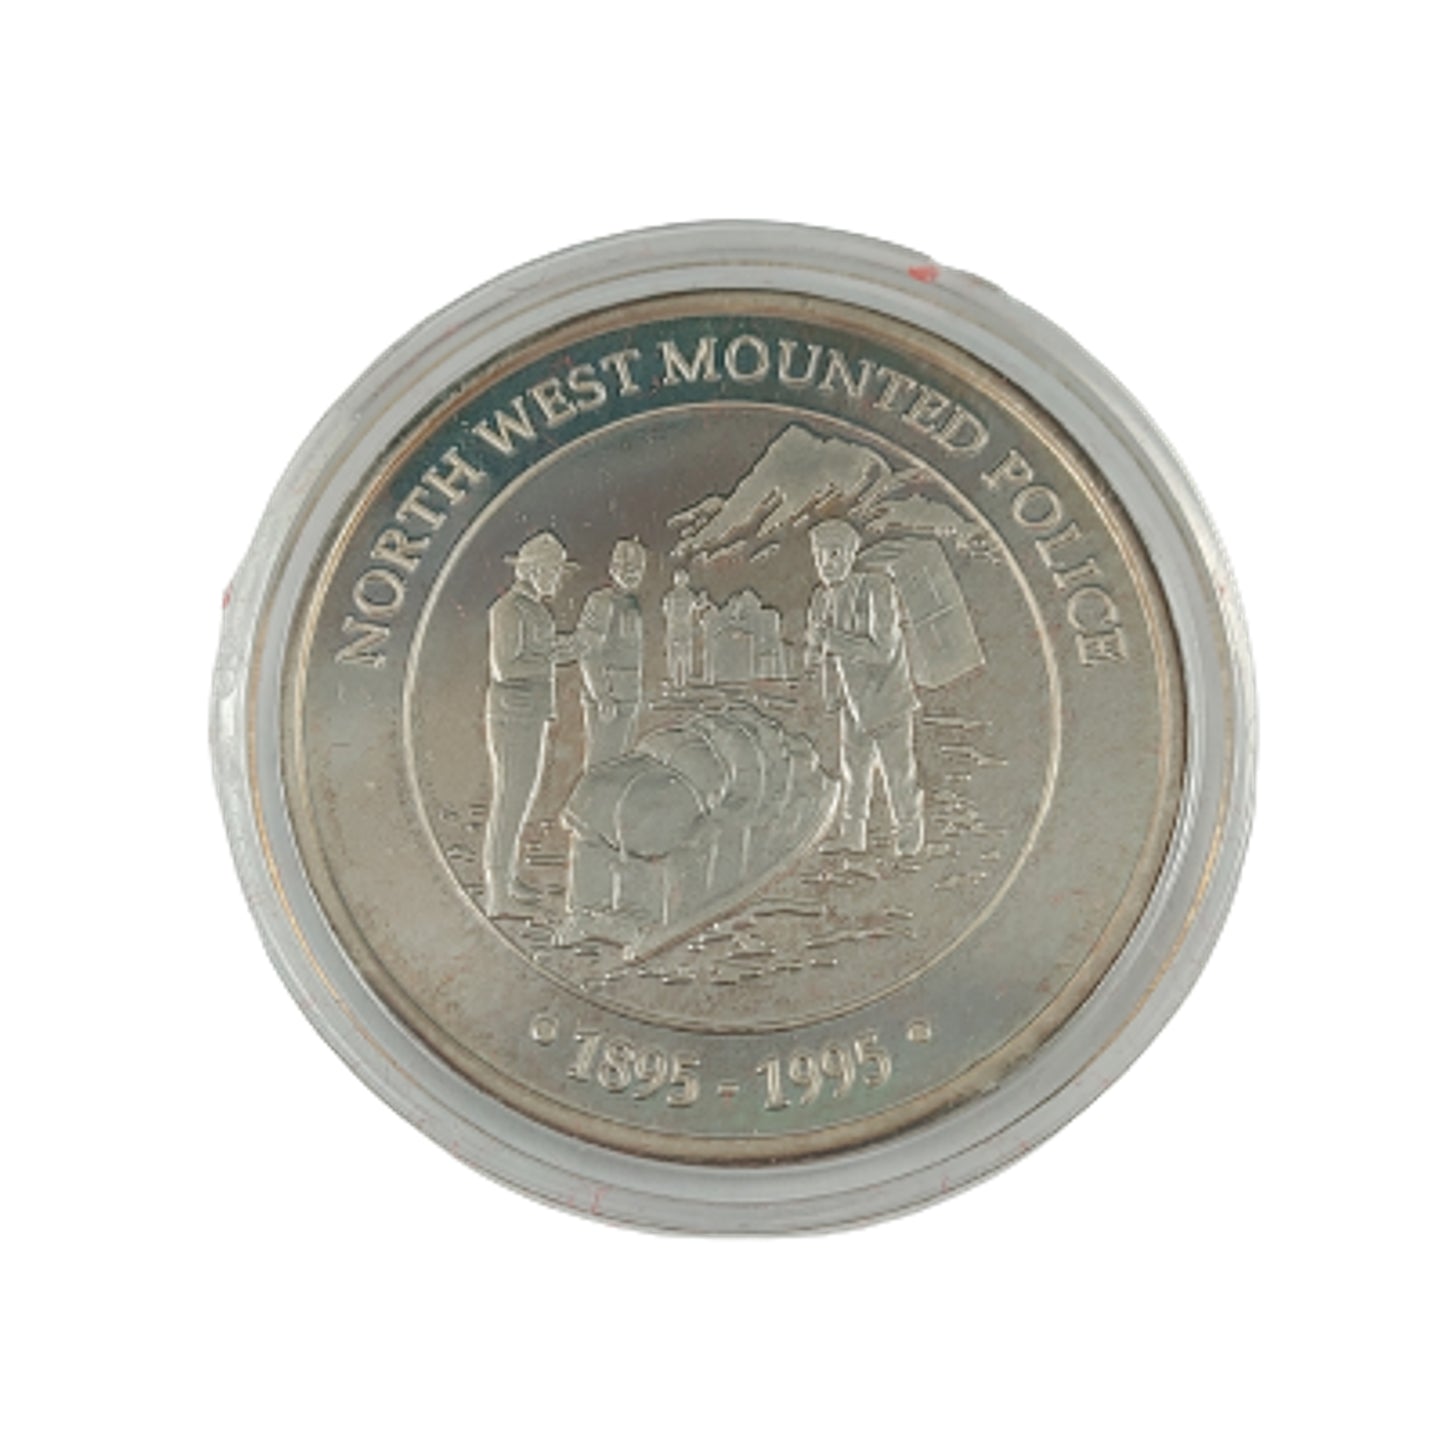 Cased RCMP Royal Canadian Mounted Police 100th Anniversary Yukon Territory Coin